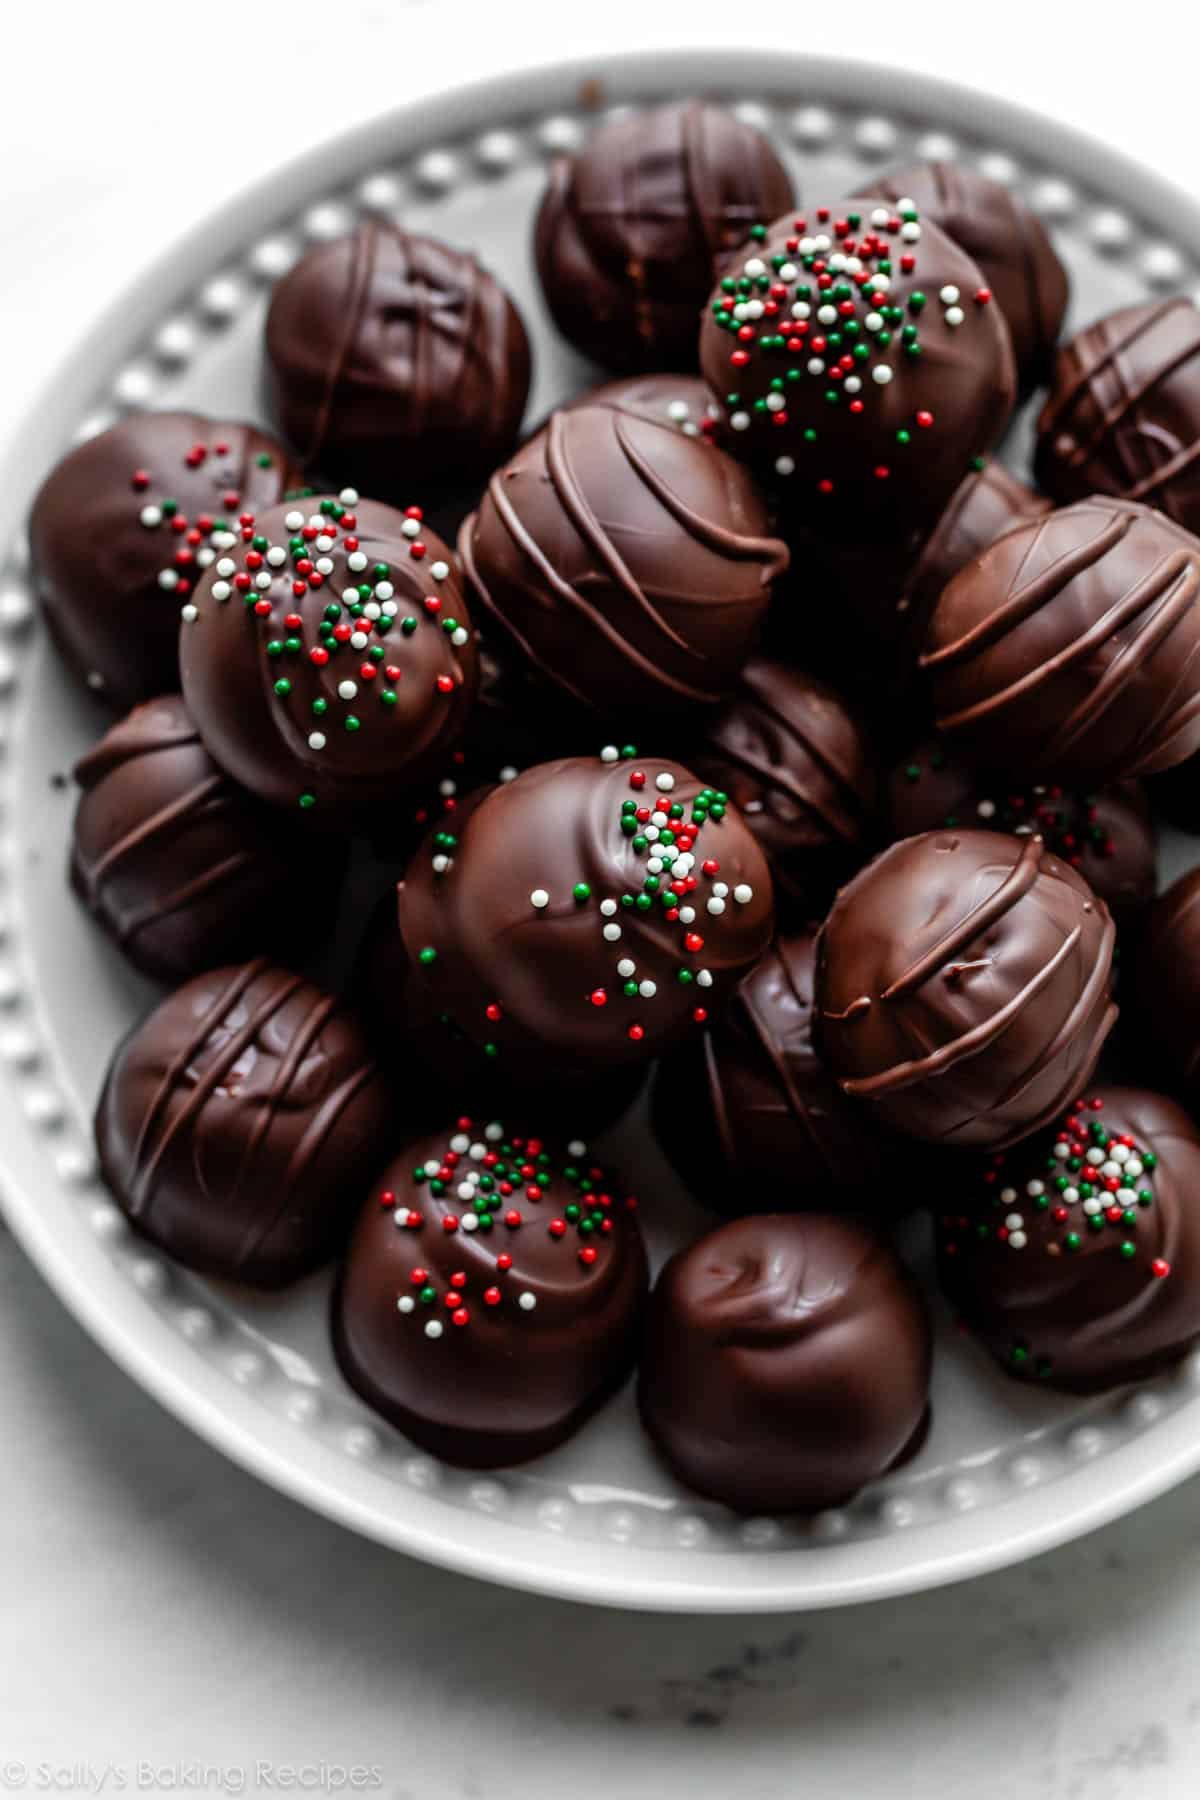 plate of peanut butter balls candies coated in chocolate and some pictured with Christmas sprinkles on top.